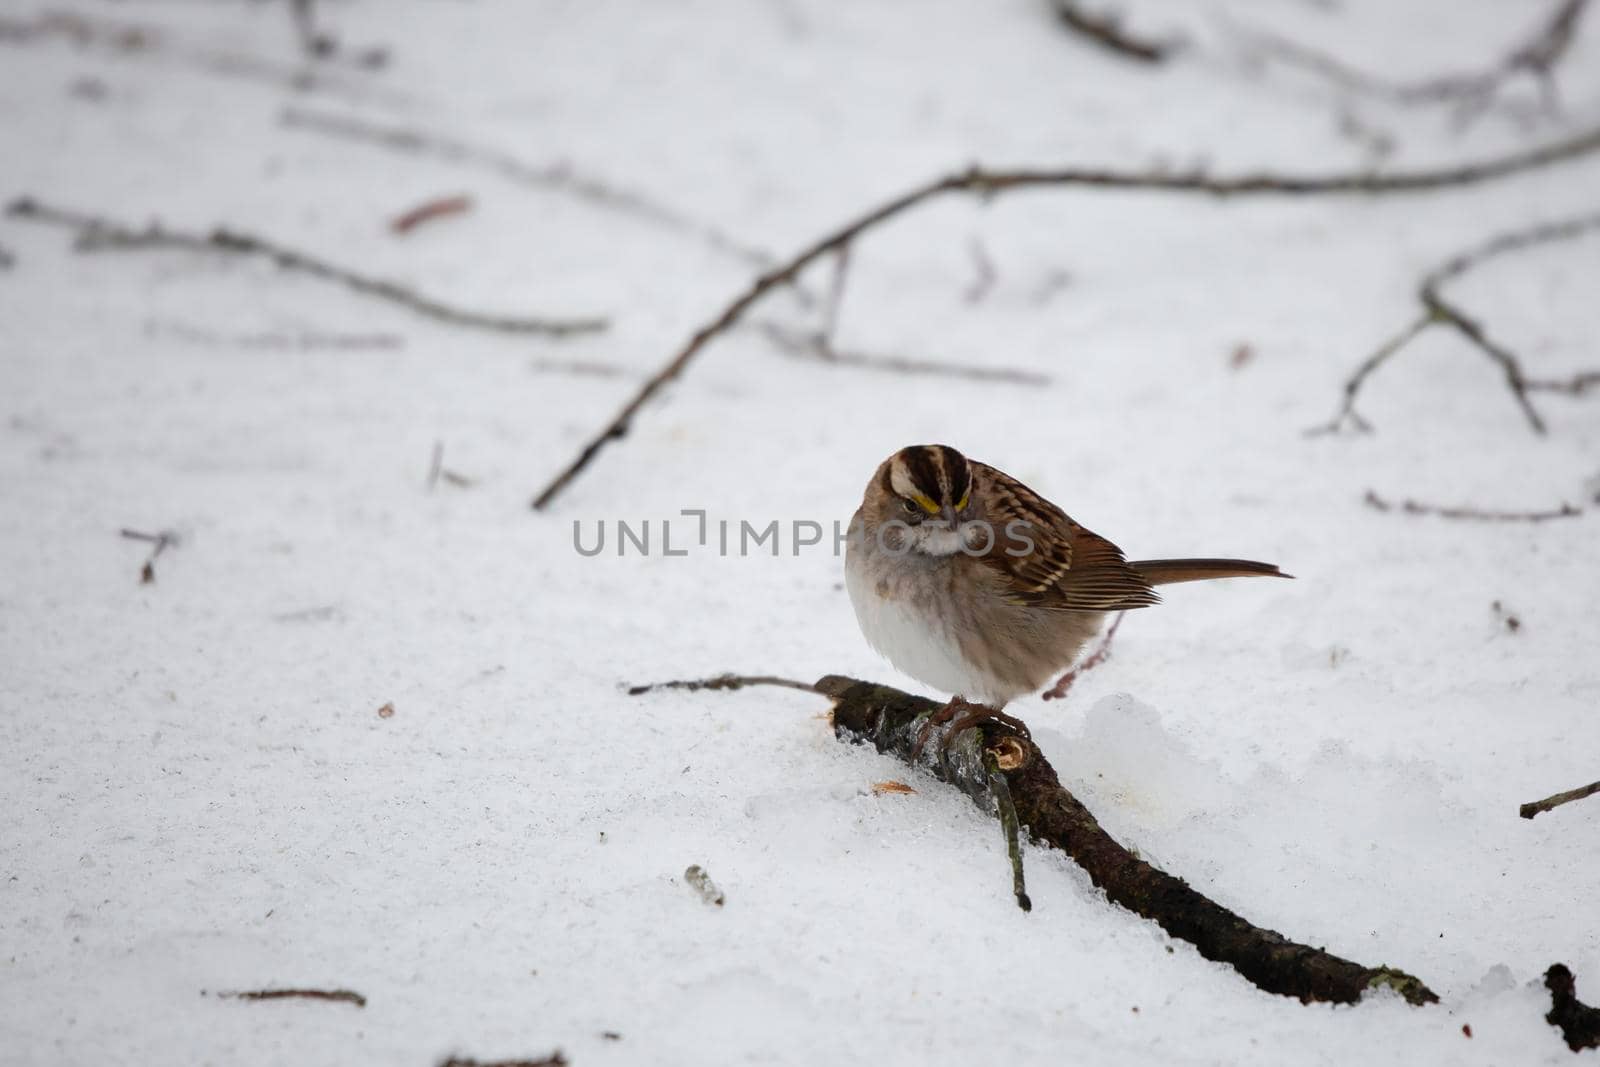 White-throated sparrow (Zonotrichia albicollis) looking around from its perch on an ice-covered fallen tree limb